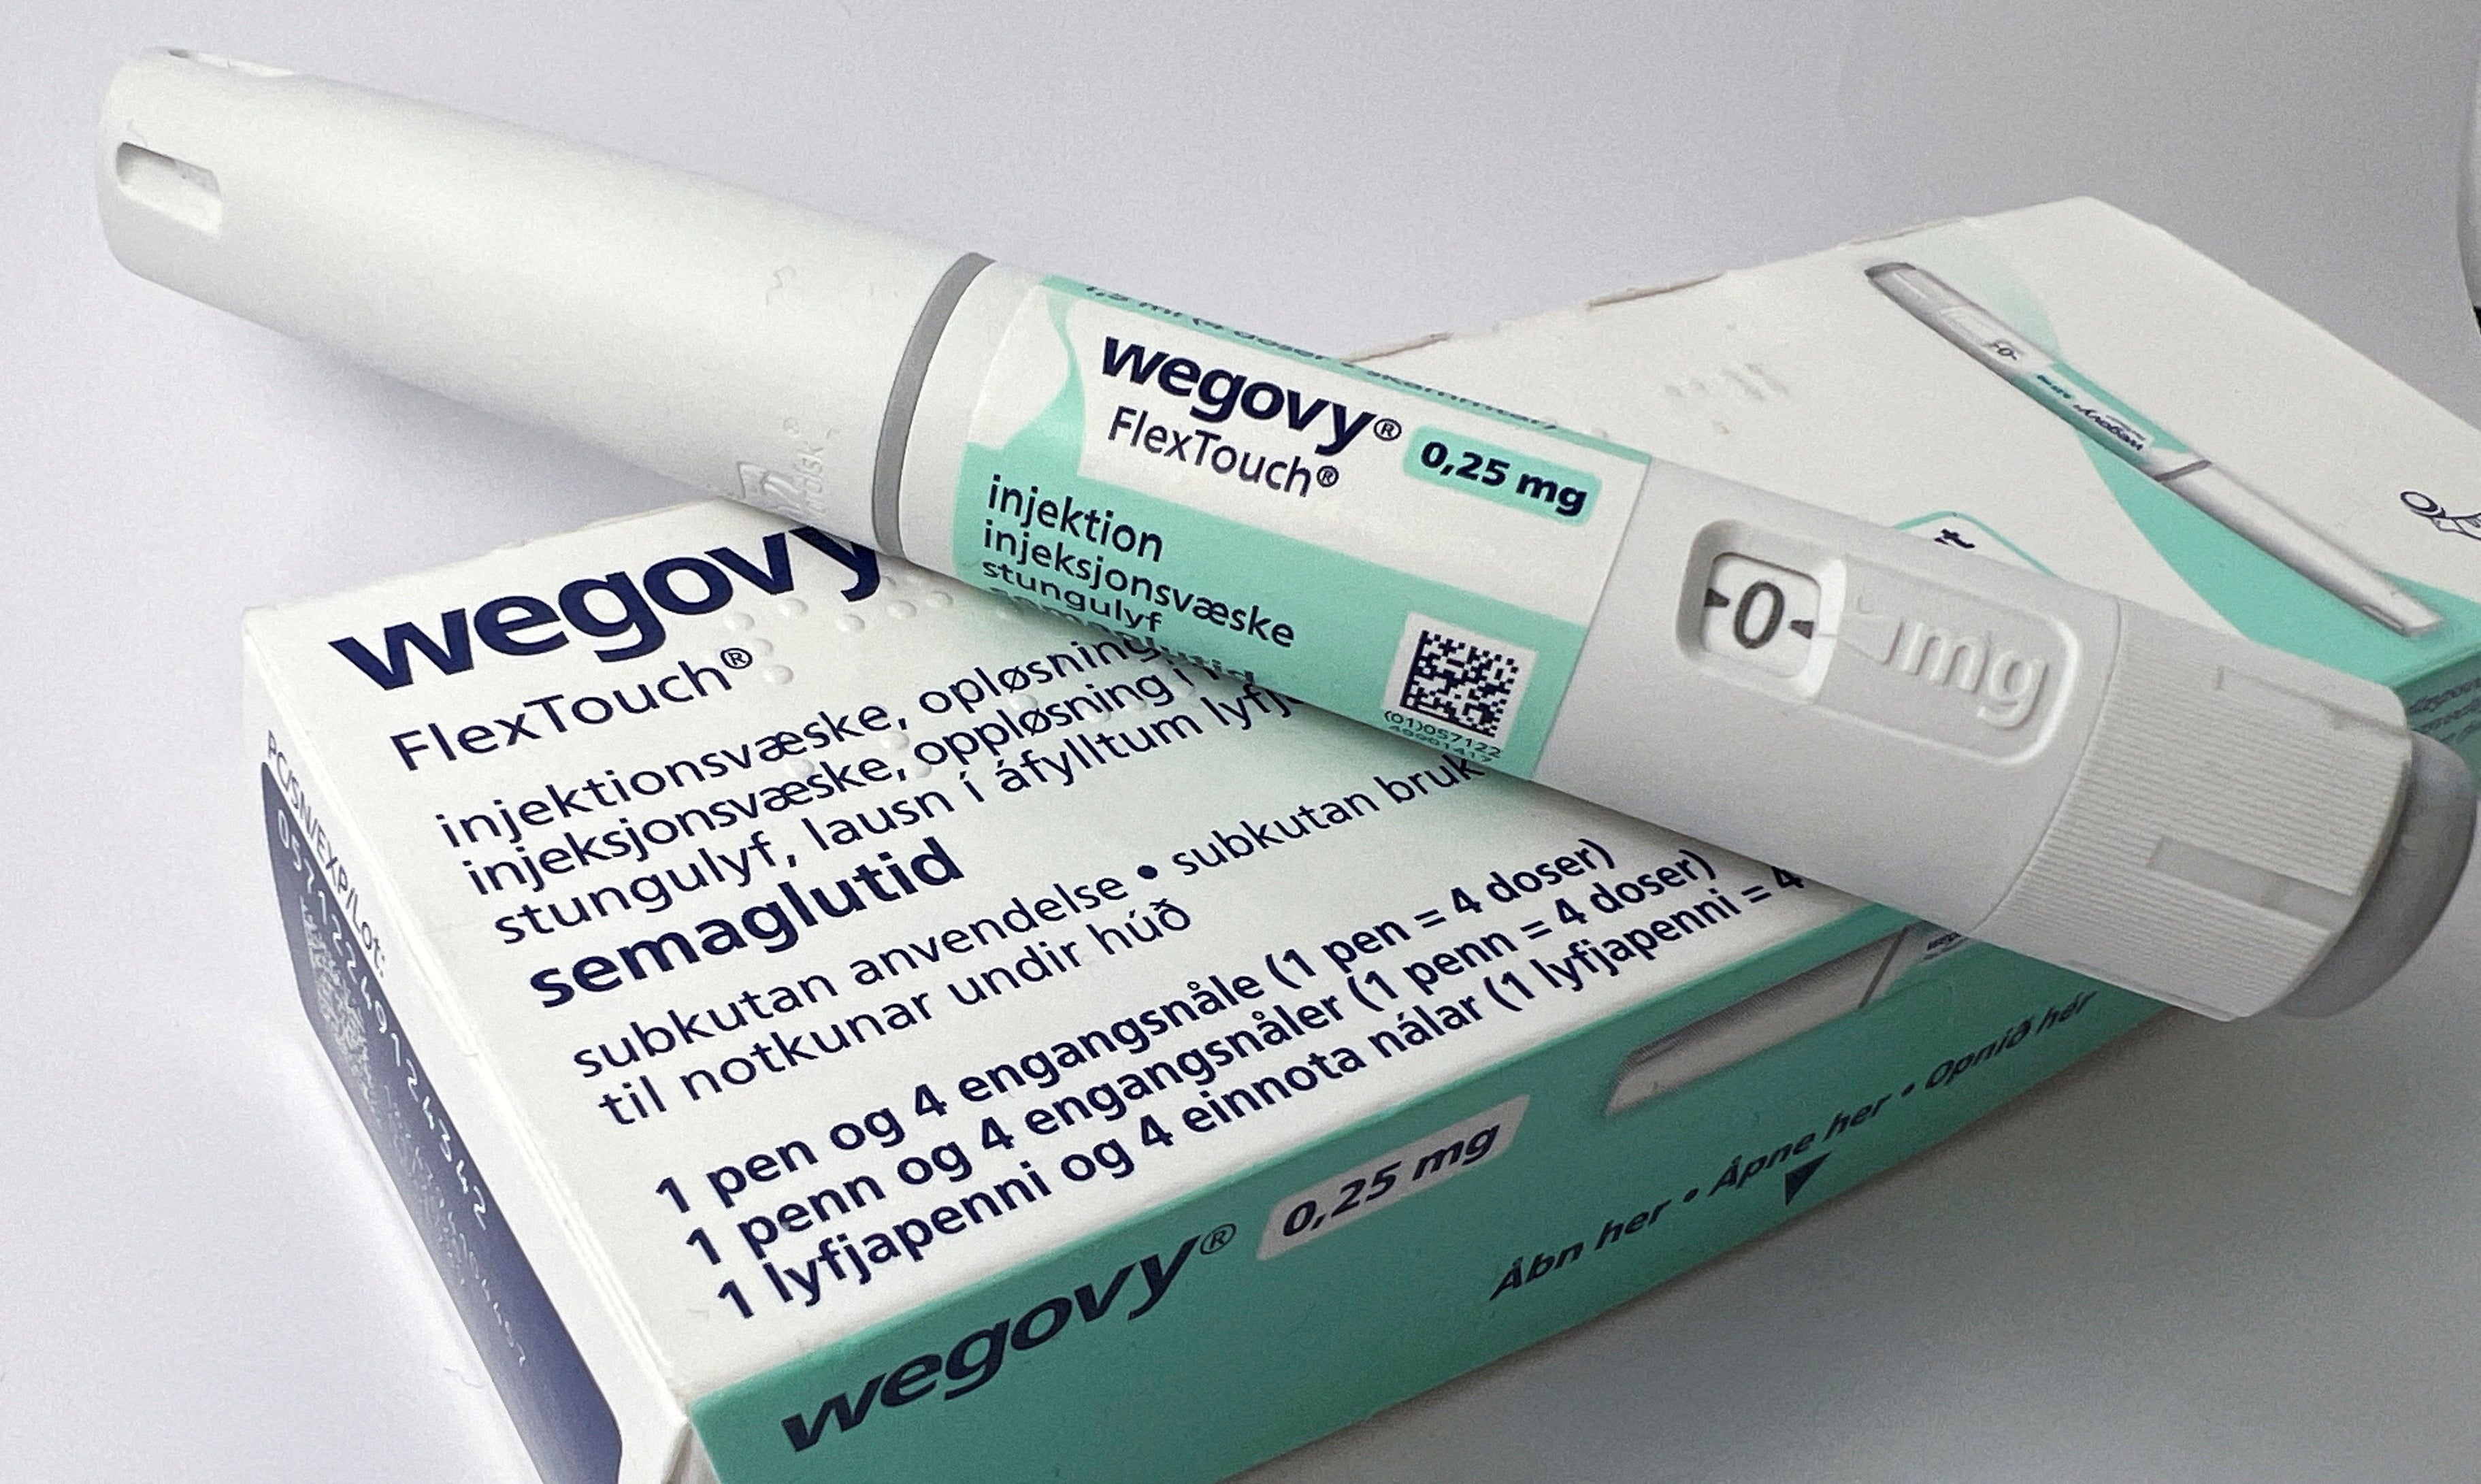 A 0.25 mg injection pen of Novo Nordisk’s weight-loss drug Wegovy